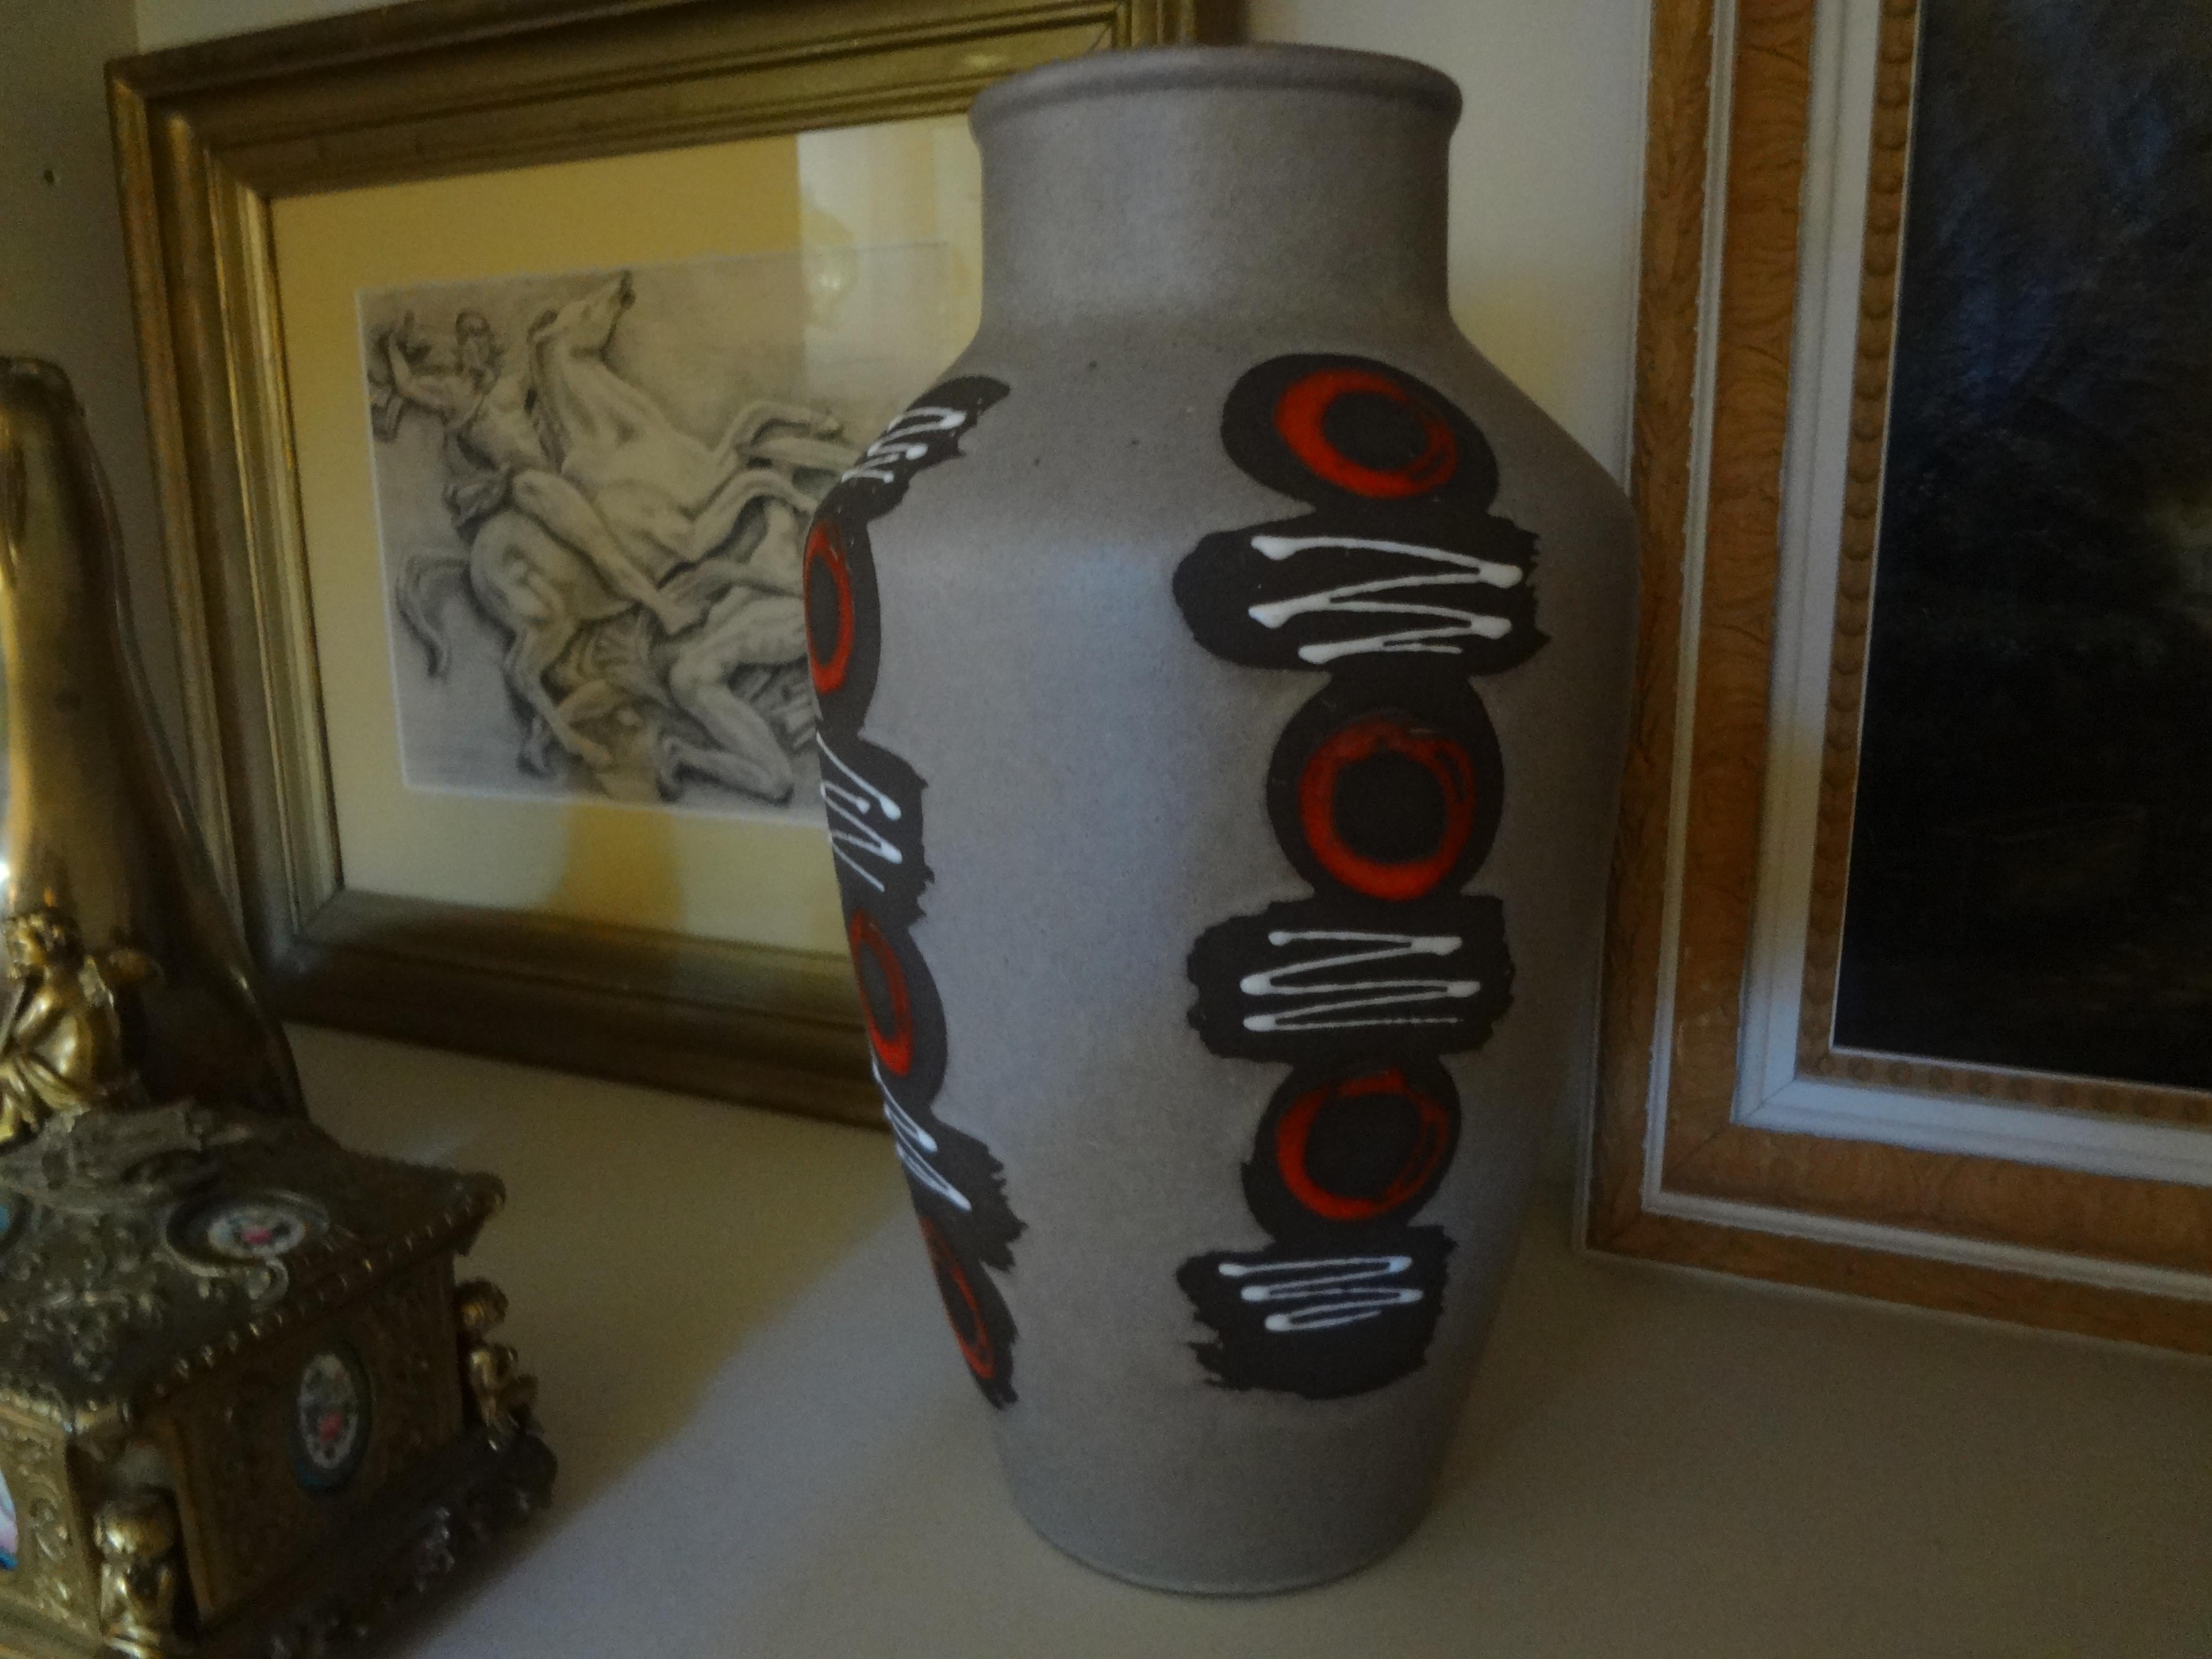 West German glazed pottery vase.
Stunning Mid-Century Modern West German glazed pottery vase with a great abstract decoration.